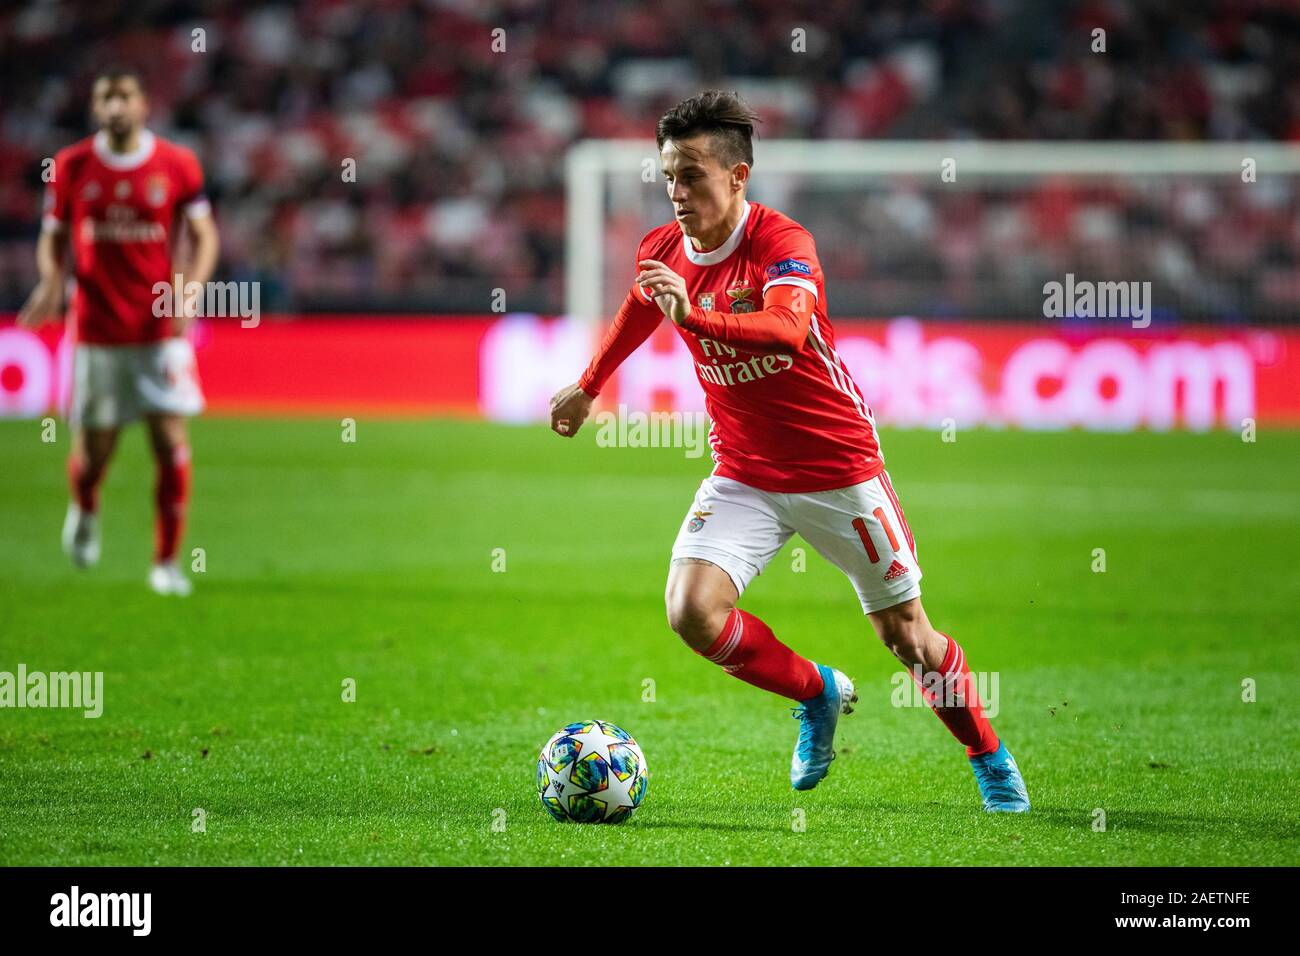 Lisbon, Portugal. 10th Dec, 2019. Franco Cervi of SL Benfica seen in action during the UEFA Champions League 2019/2020 football match between SL Benfica and FC Zenit in Lisbon.(Final score; SL Benfica Lisbon 3:0 FC Zenit) Credit: SOPA Images Limited/Alamy Live News Stock Photo